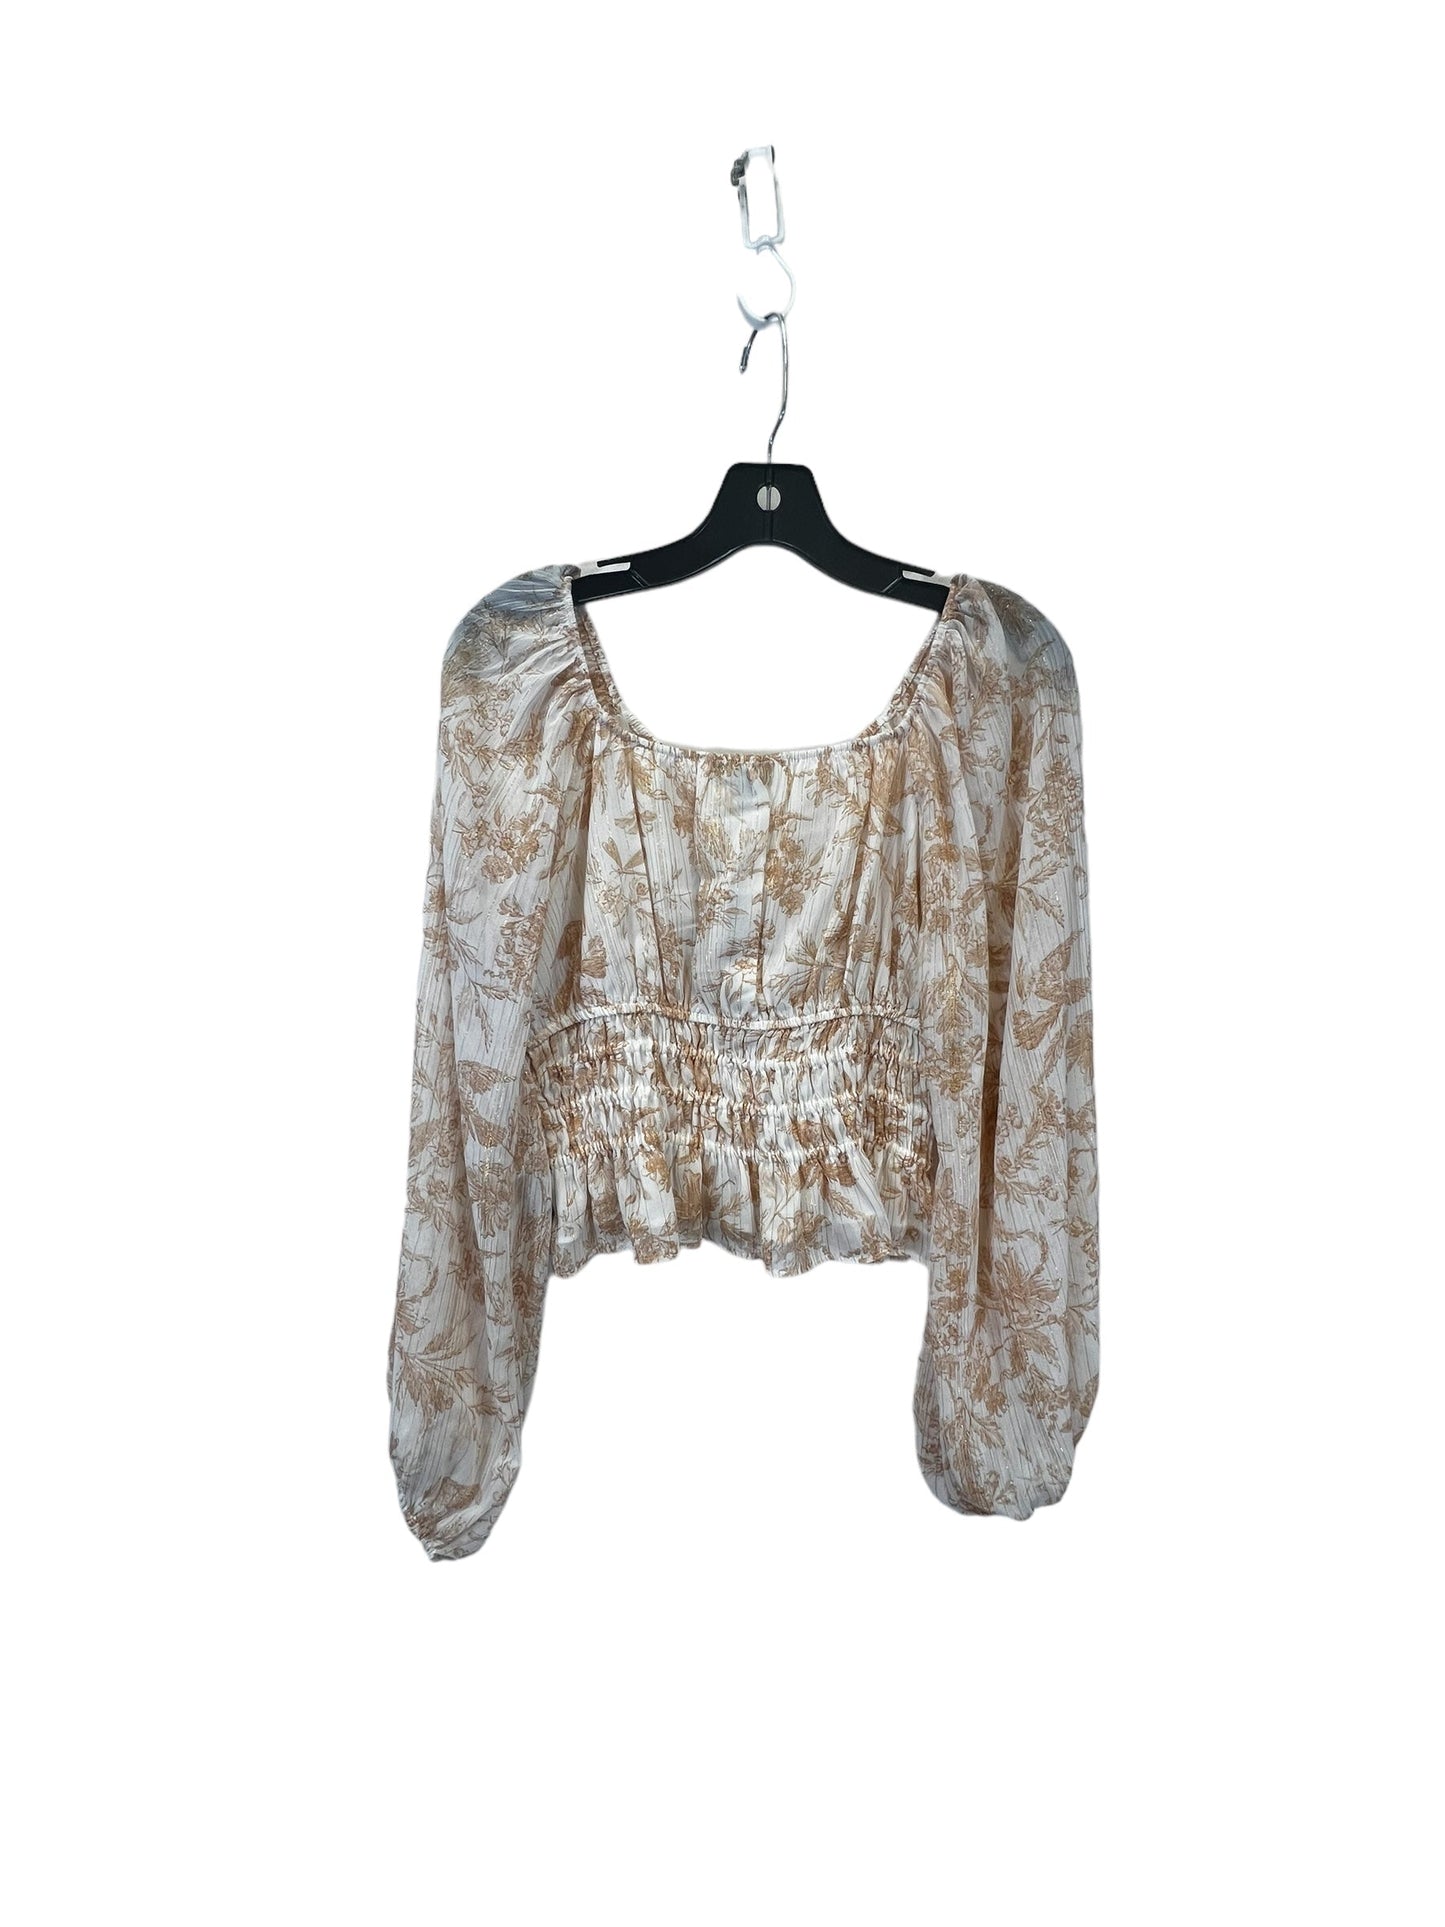 Rose Gold Top Long Sleeve Express, Size S